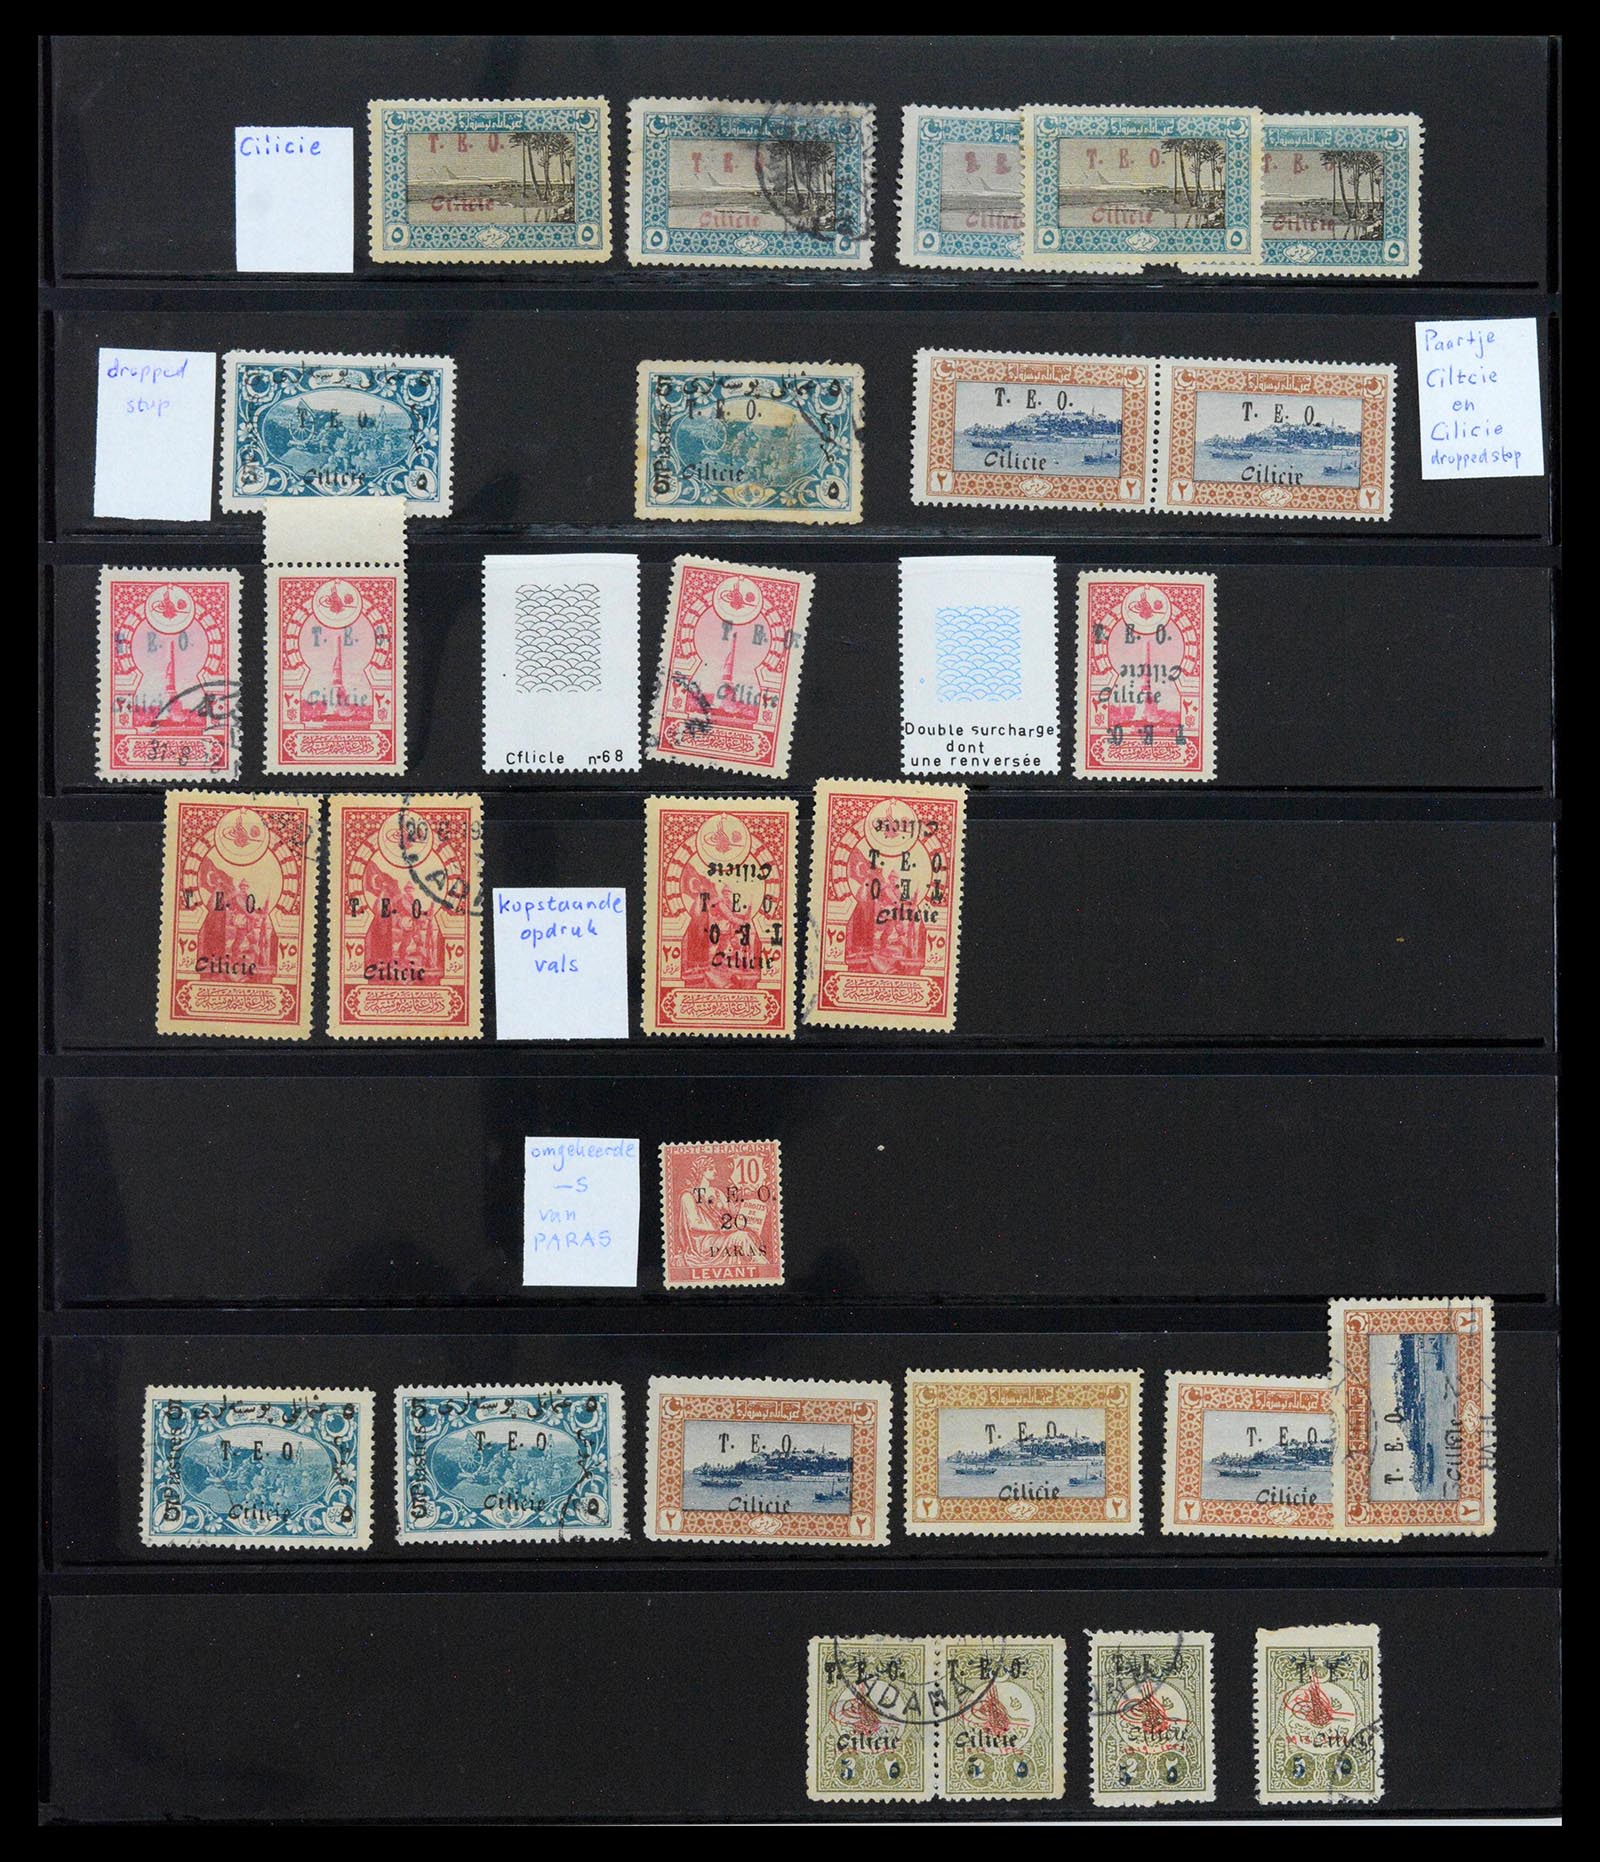 39457 0007 - Stamp collection 39457 Cilicia 1919-1921.